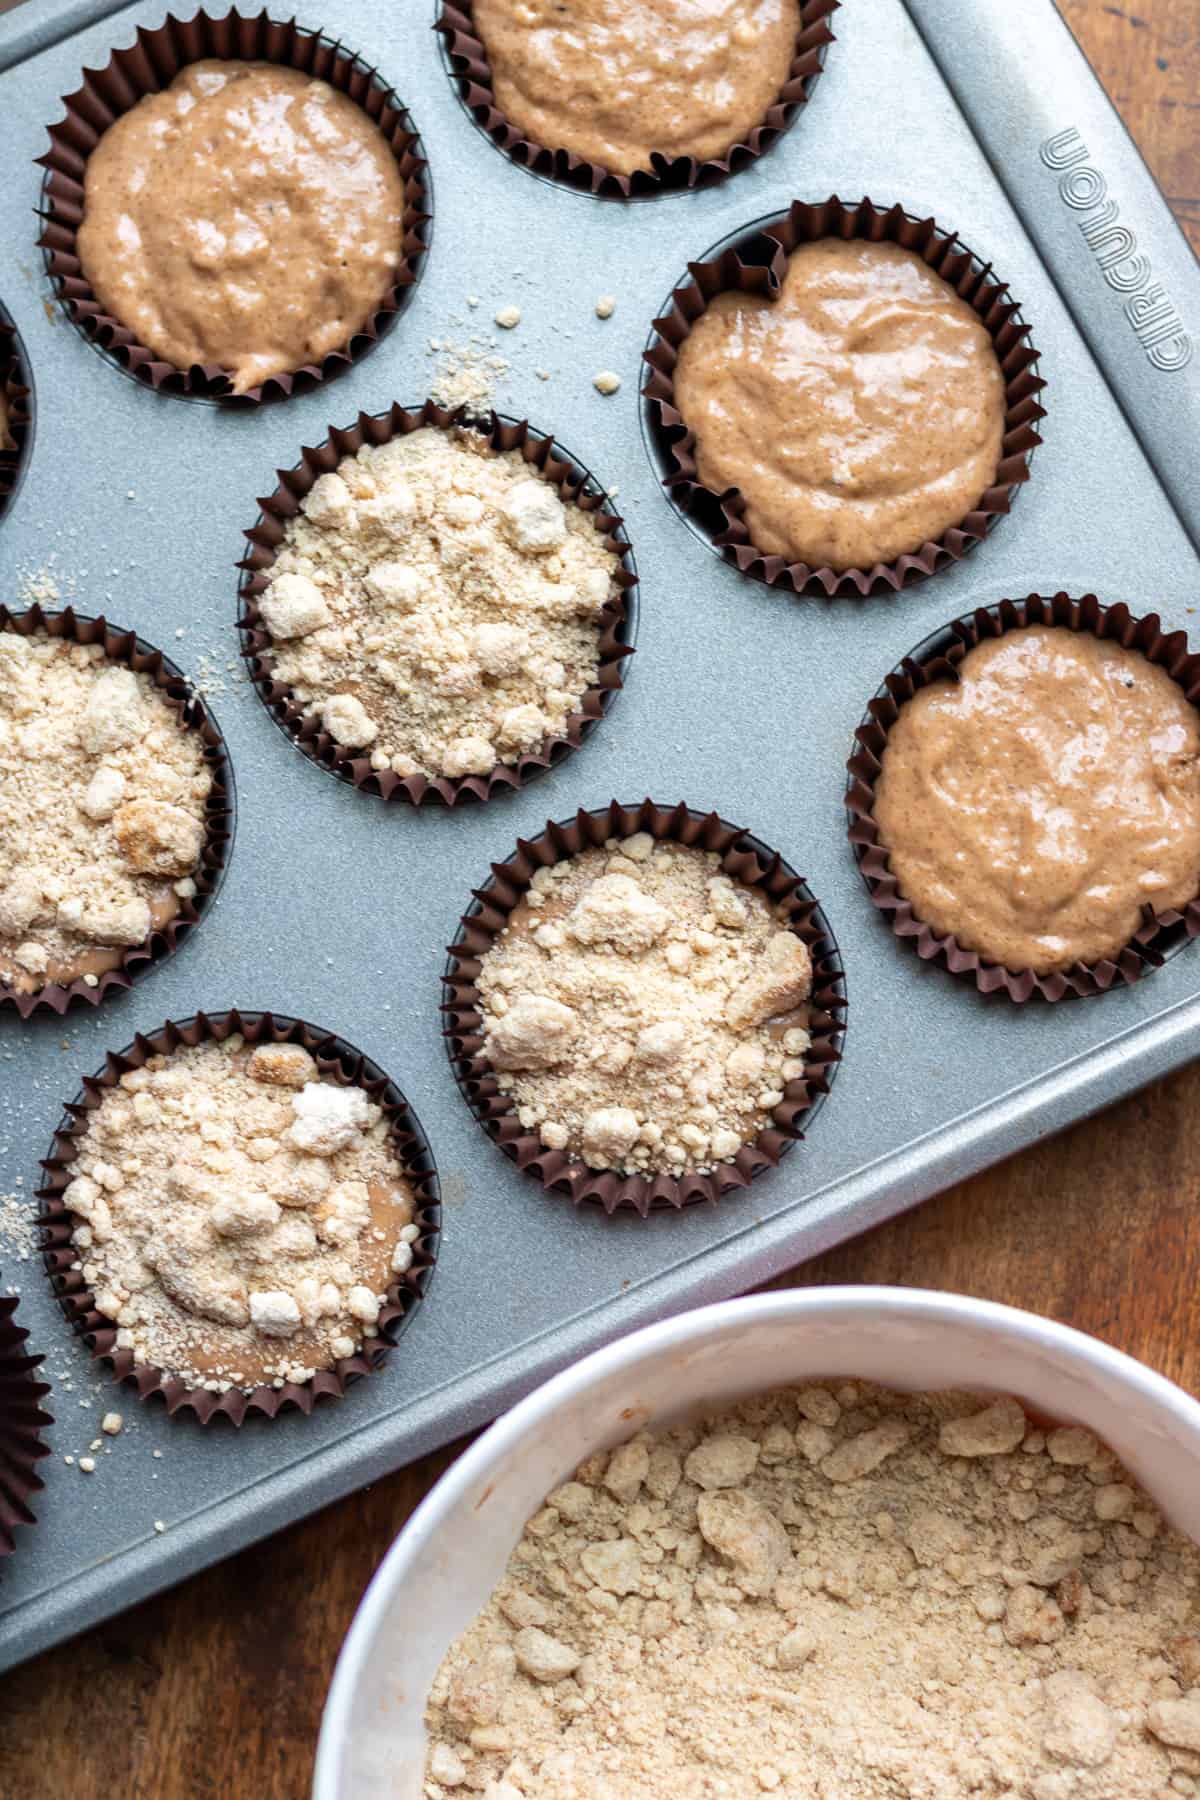 Adding the streusel toppings to the muffin tray with uncooked batter.